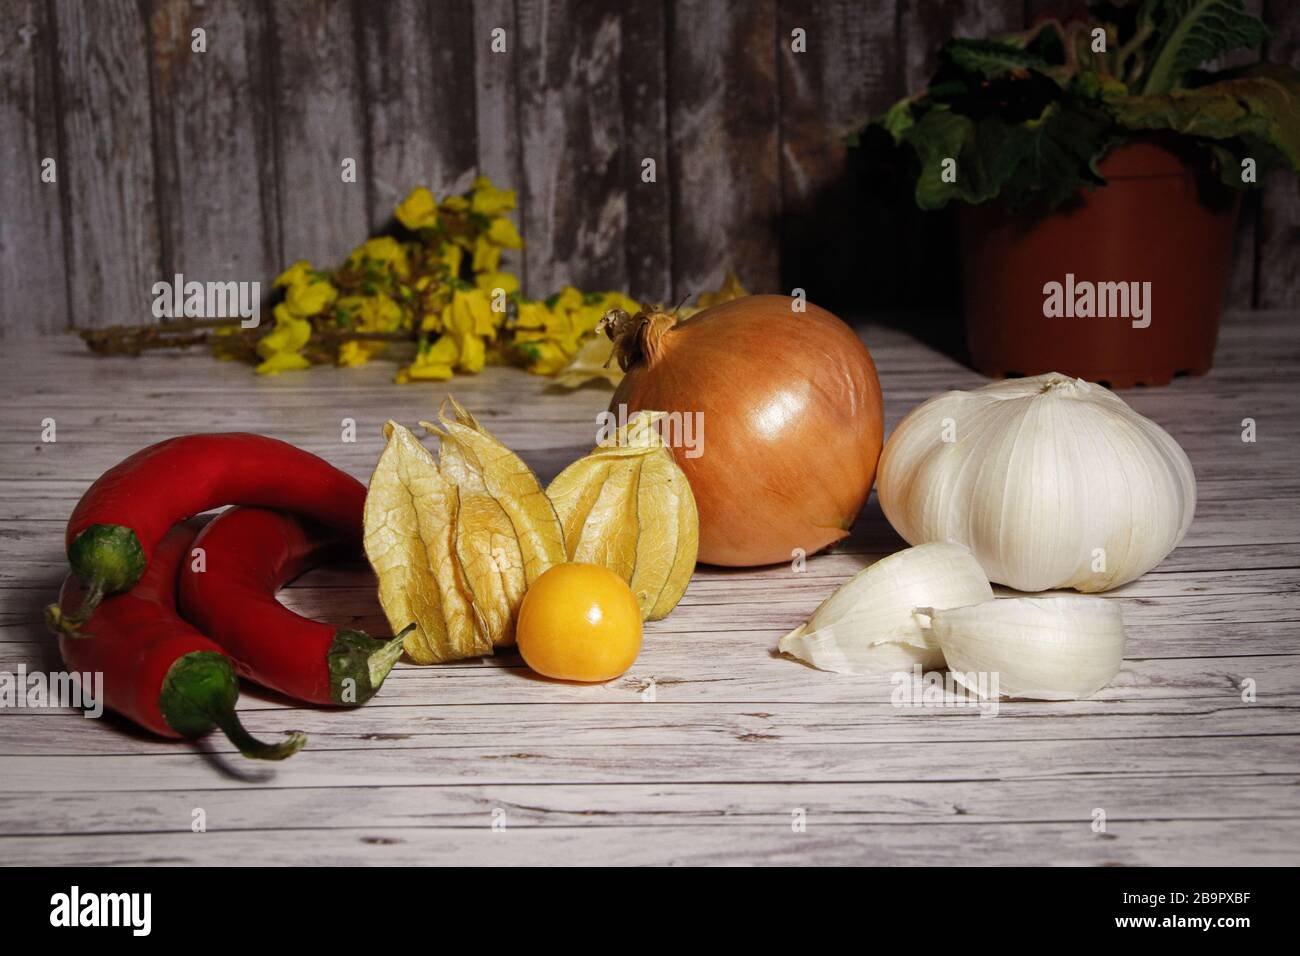 For a healthy life, eat fruits and vegetables daily Stock Photo